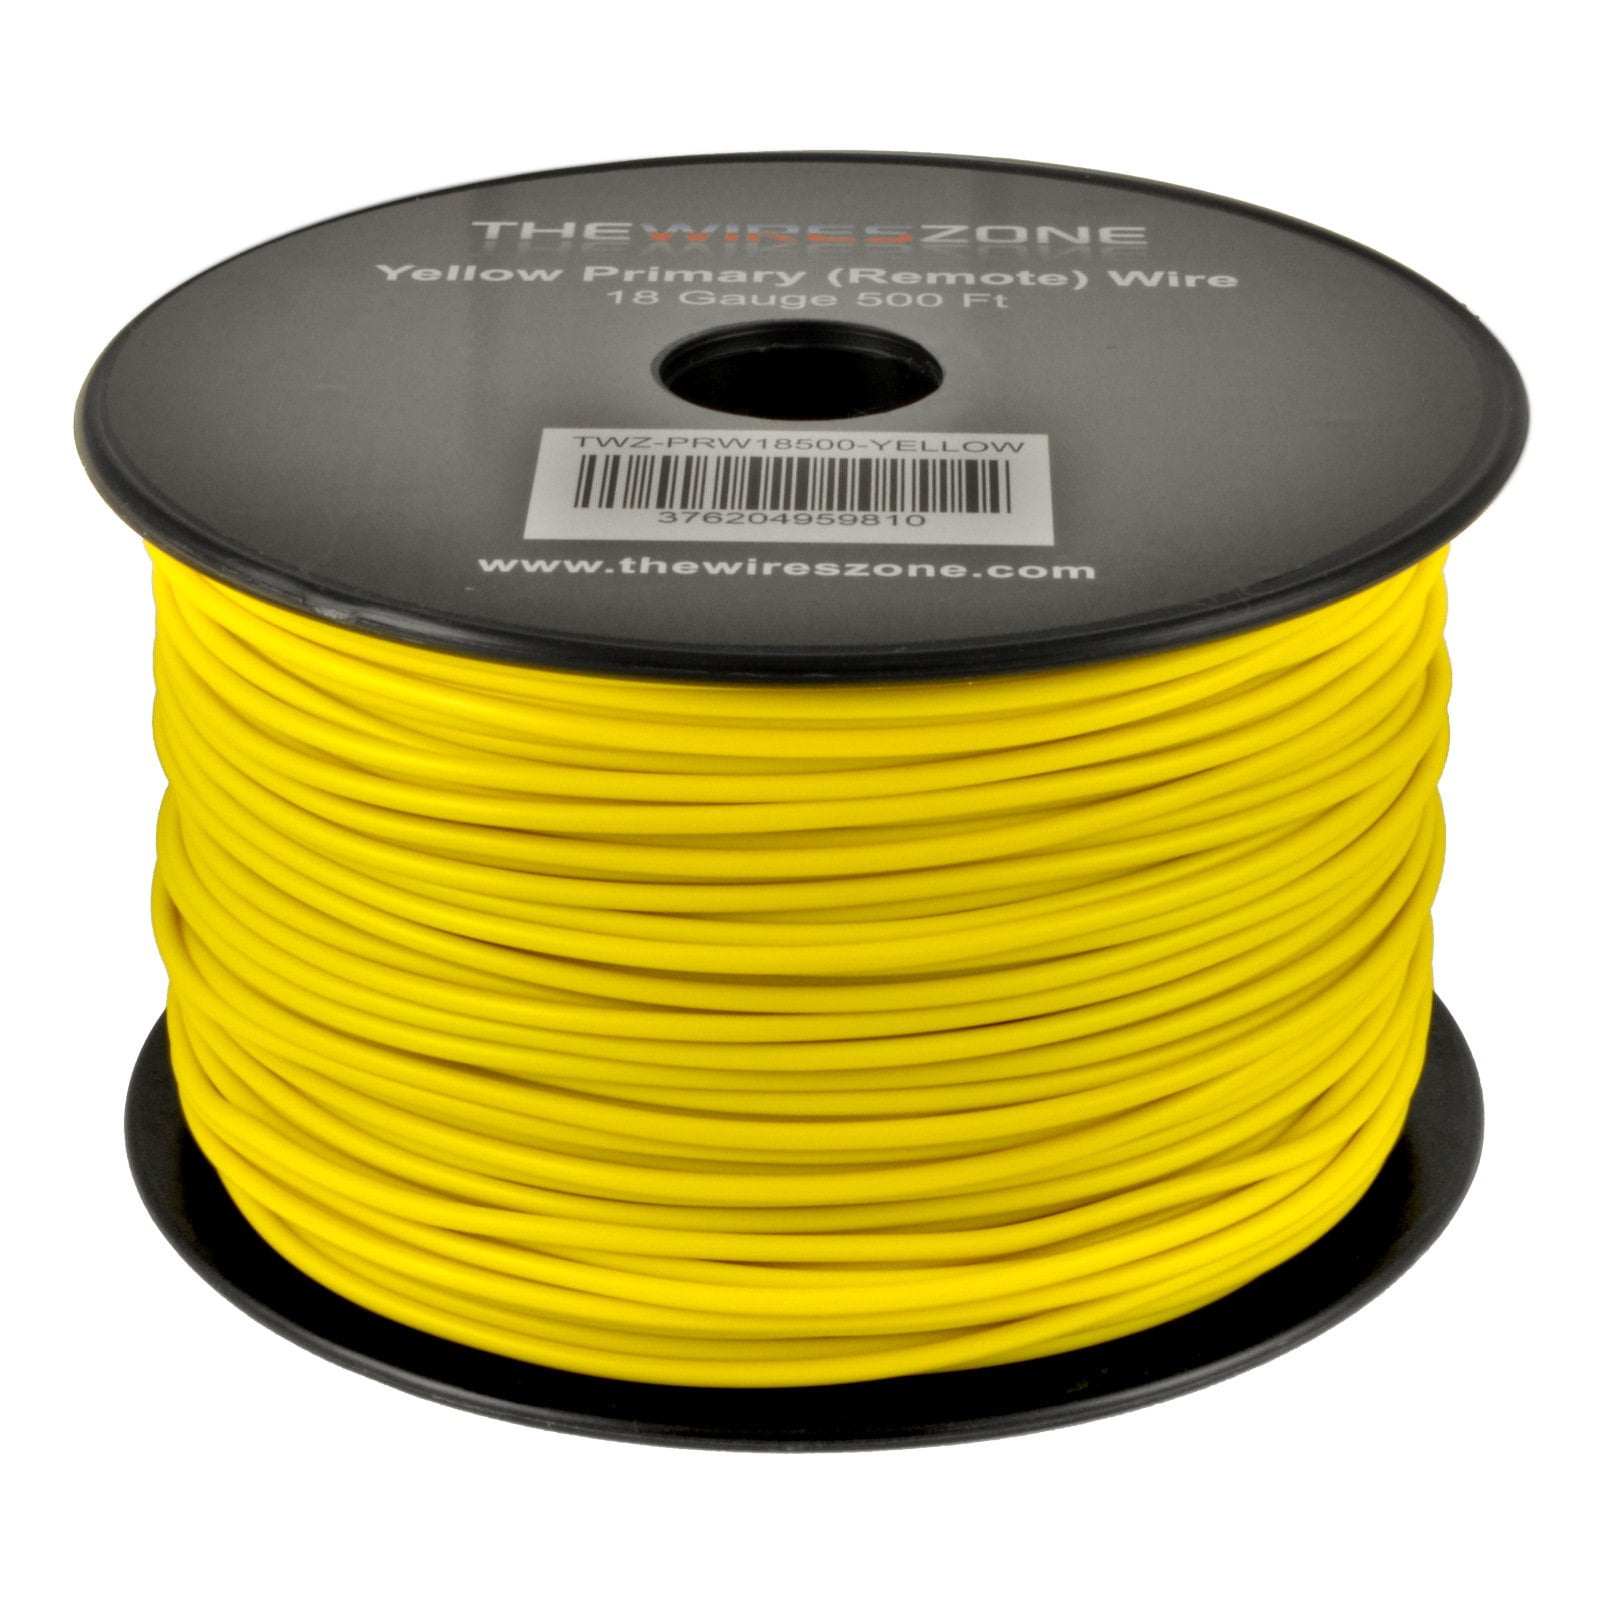 14 GAUGE WIRE GREEN W/ YELLOW 200' FT PRIMARY AWG STRANDED COPPER POWER REMOTE 